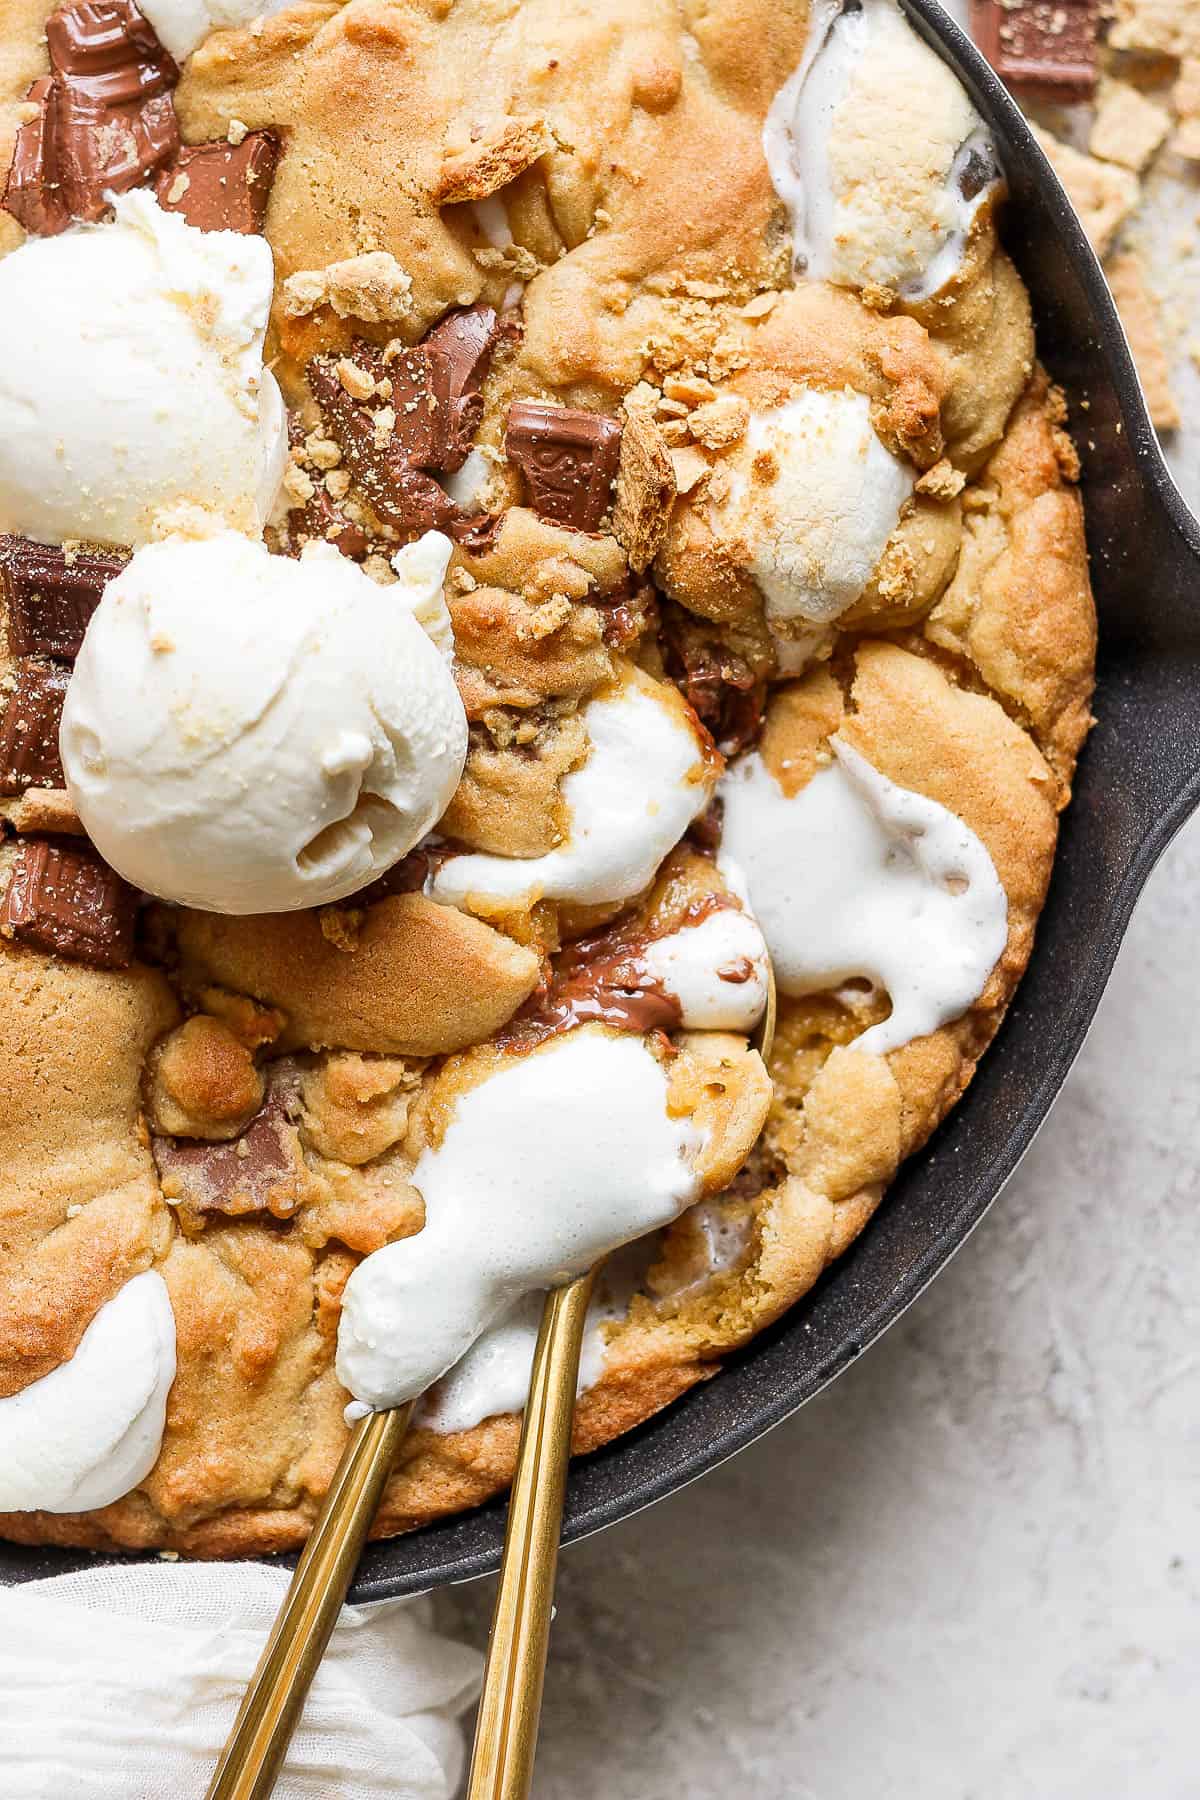 Ice cream and spoons in the cookie skillet.